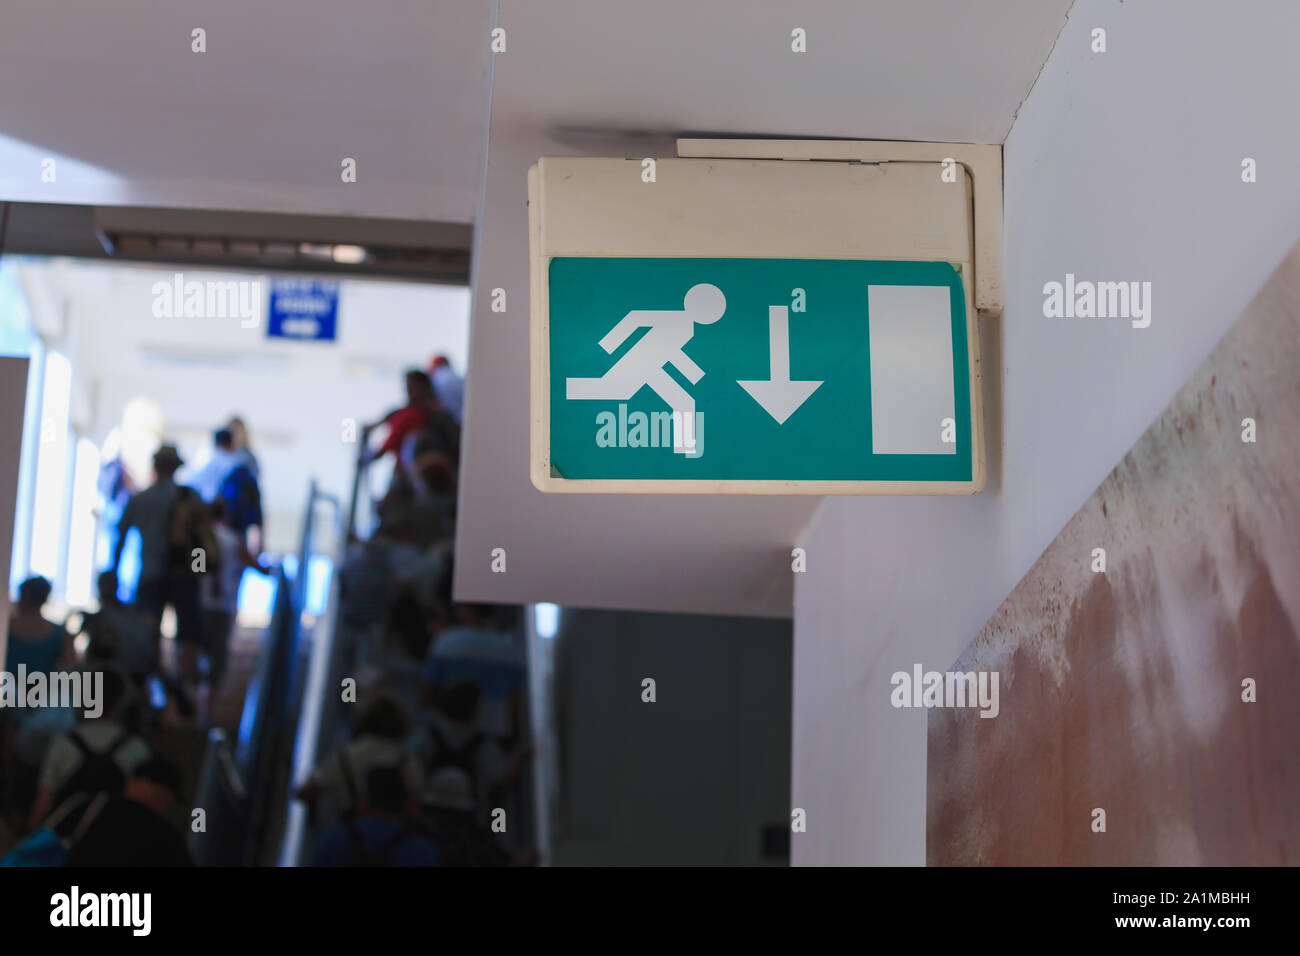 Emergency exit sign in corridor mounted on a wall. People walking in corridor background Stock Photo